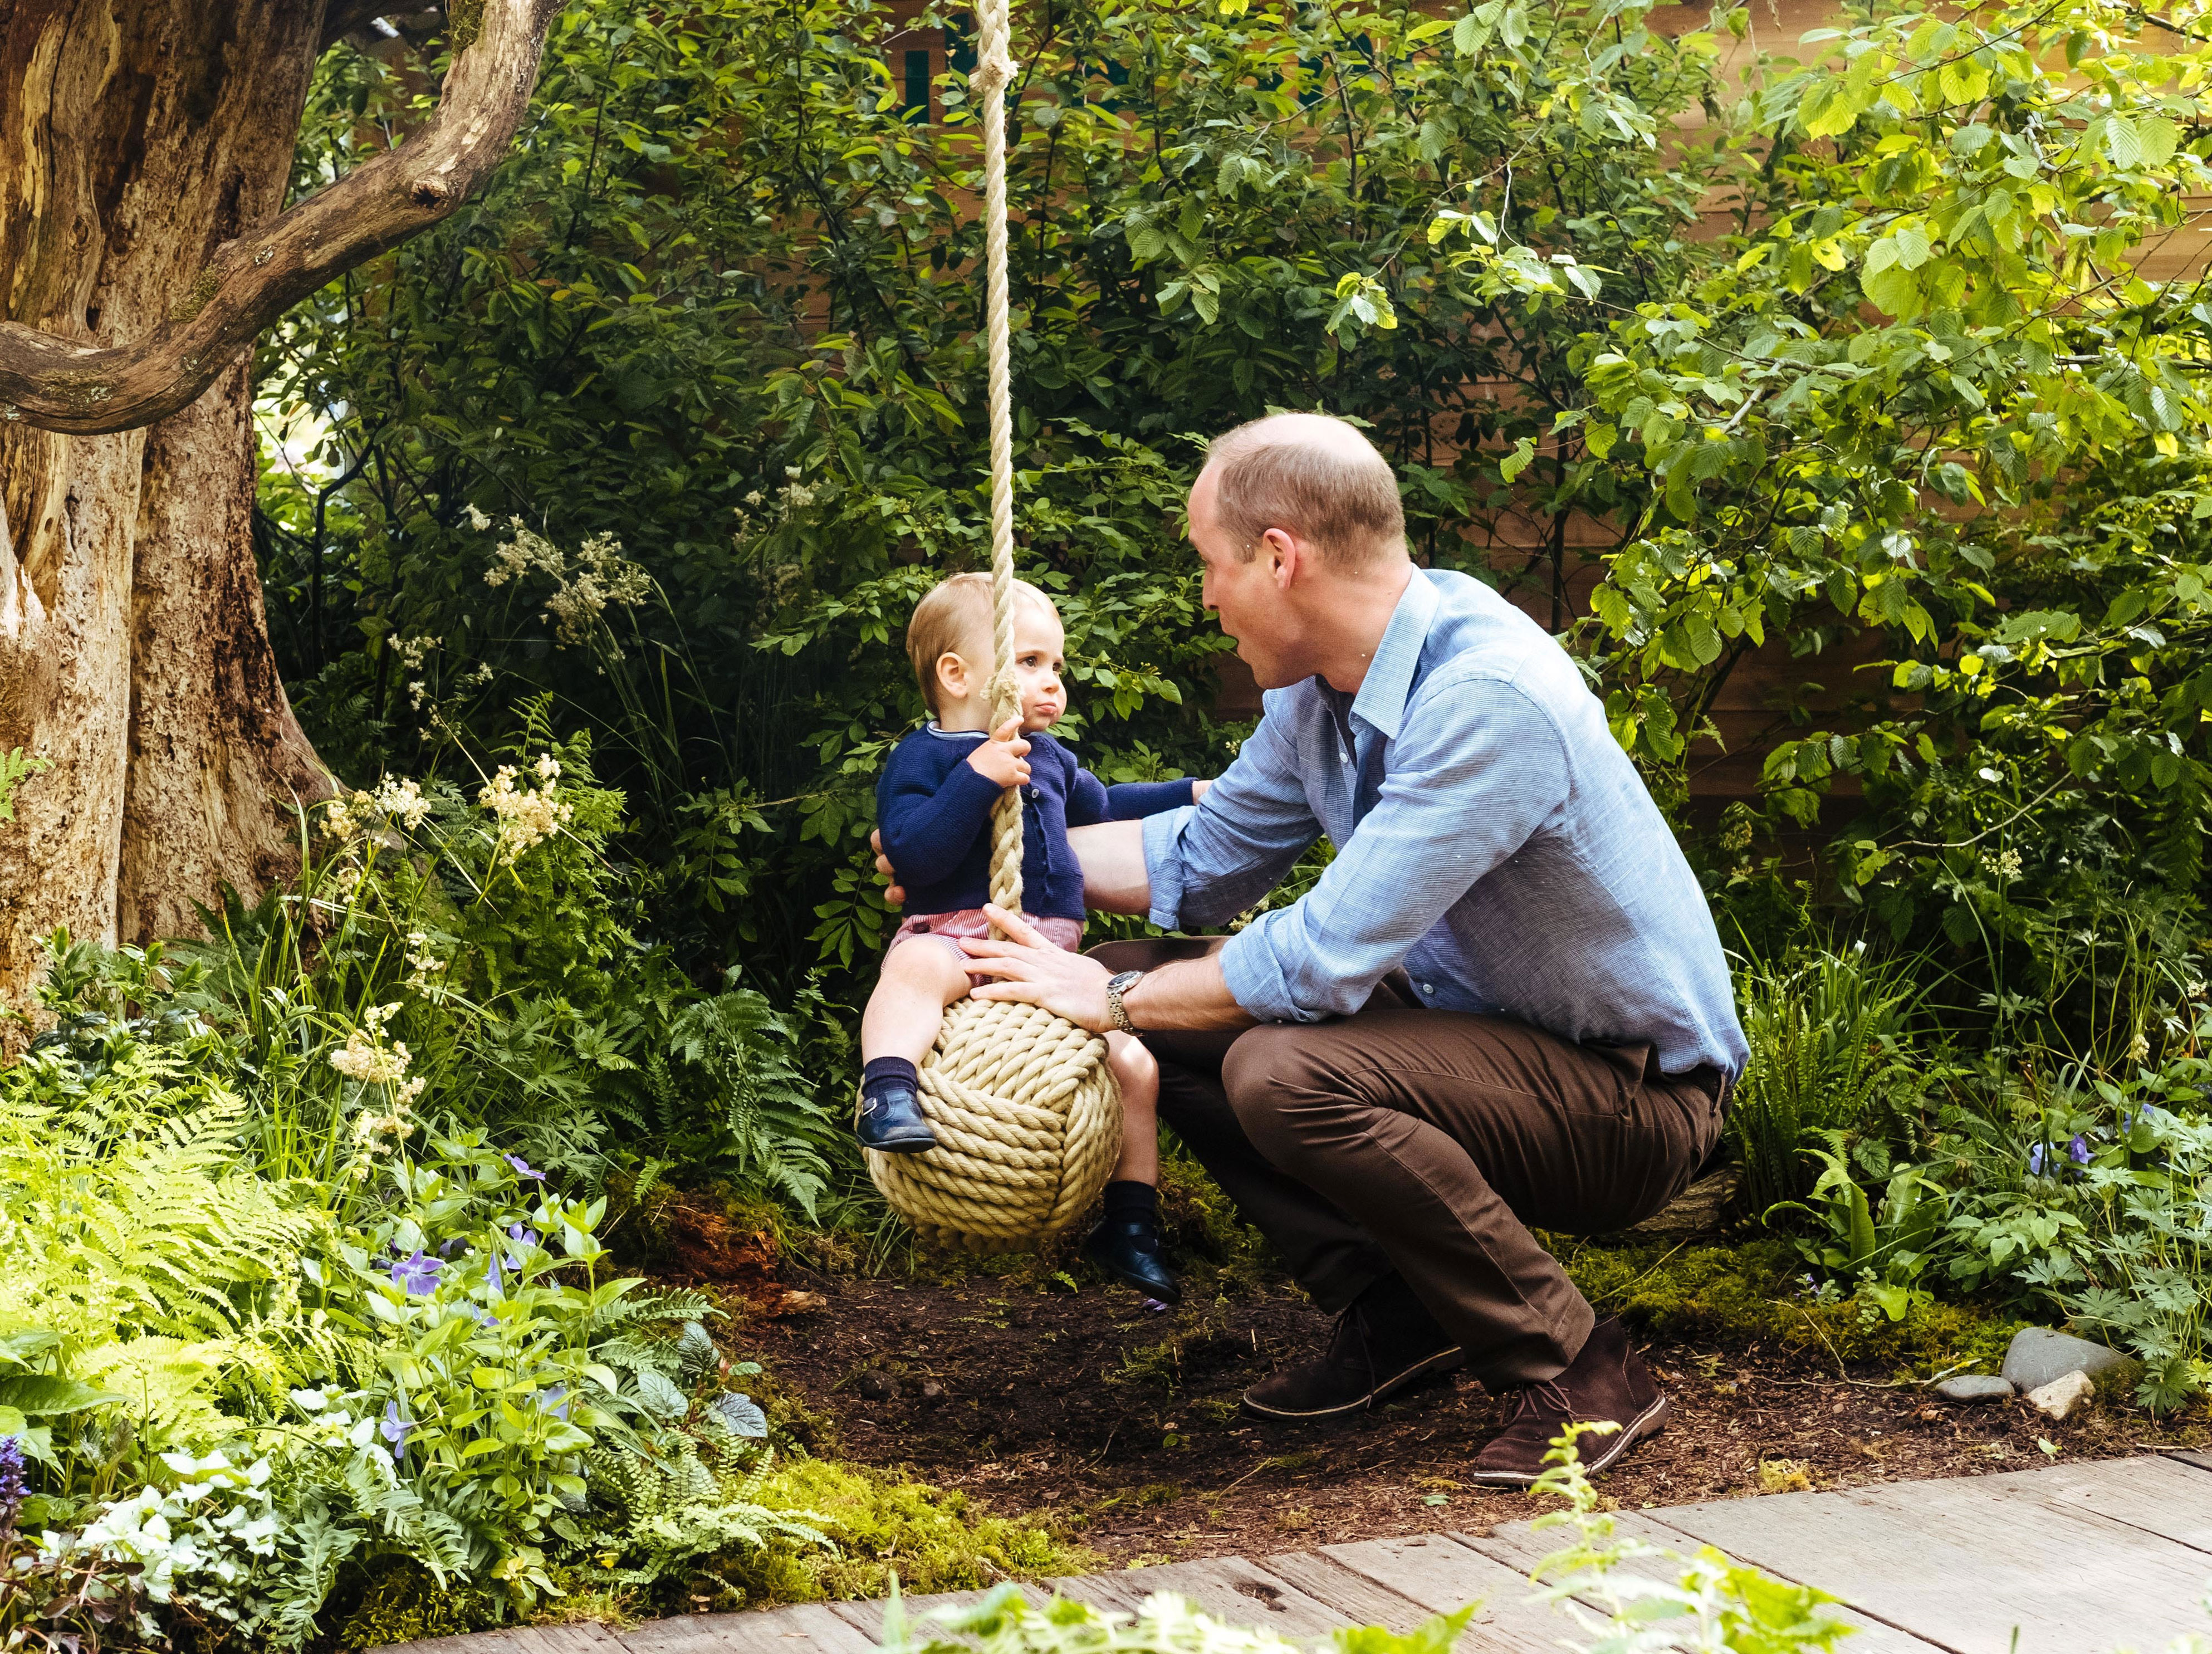 <p><a href="https://www.wonderwall.com/celebrity/profiles/overview/prince-william-482.article">Prince William</a> lovingly played with son Prince Louis on a rope ball swing in the garden <a href="https://www.wonderwall.com/celebrity/profiles/overview/duchess-kate-1356.article">Duchess Kate</a> co-designed with Adam White and Andree Davies for the RHS Chelsea Flower Show in London on May 19, 2019.</p>